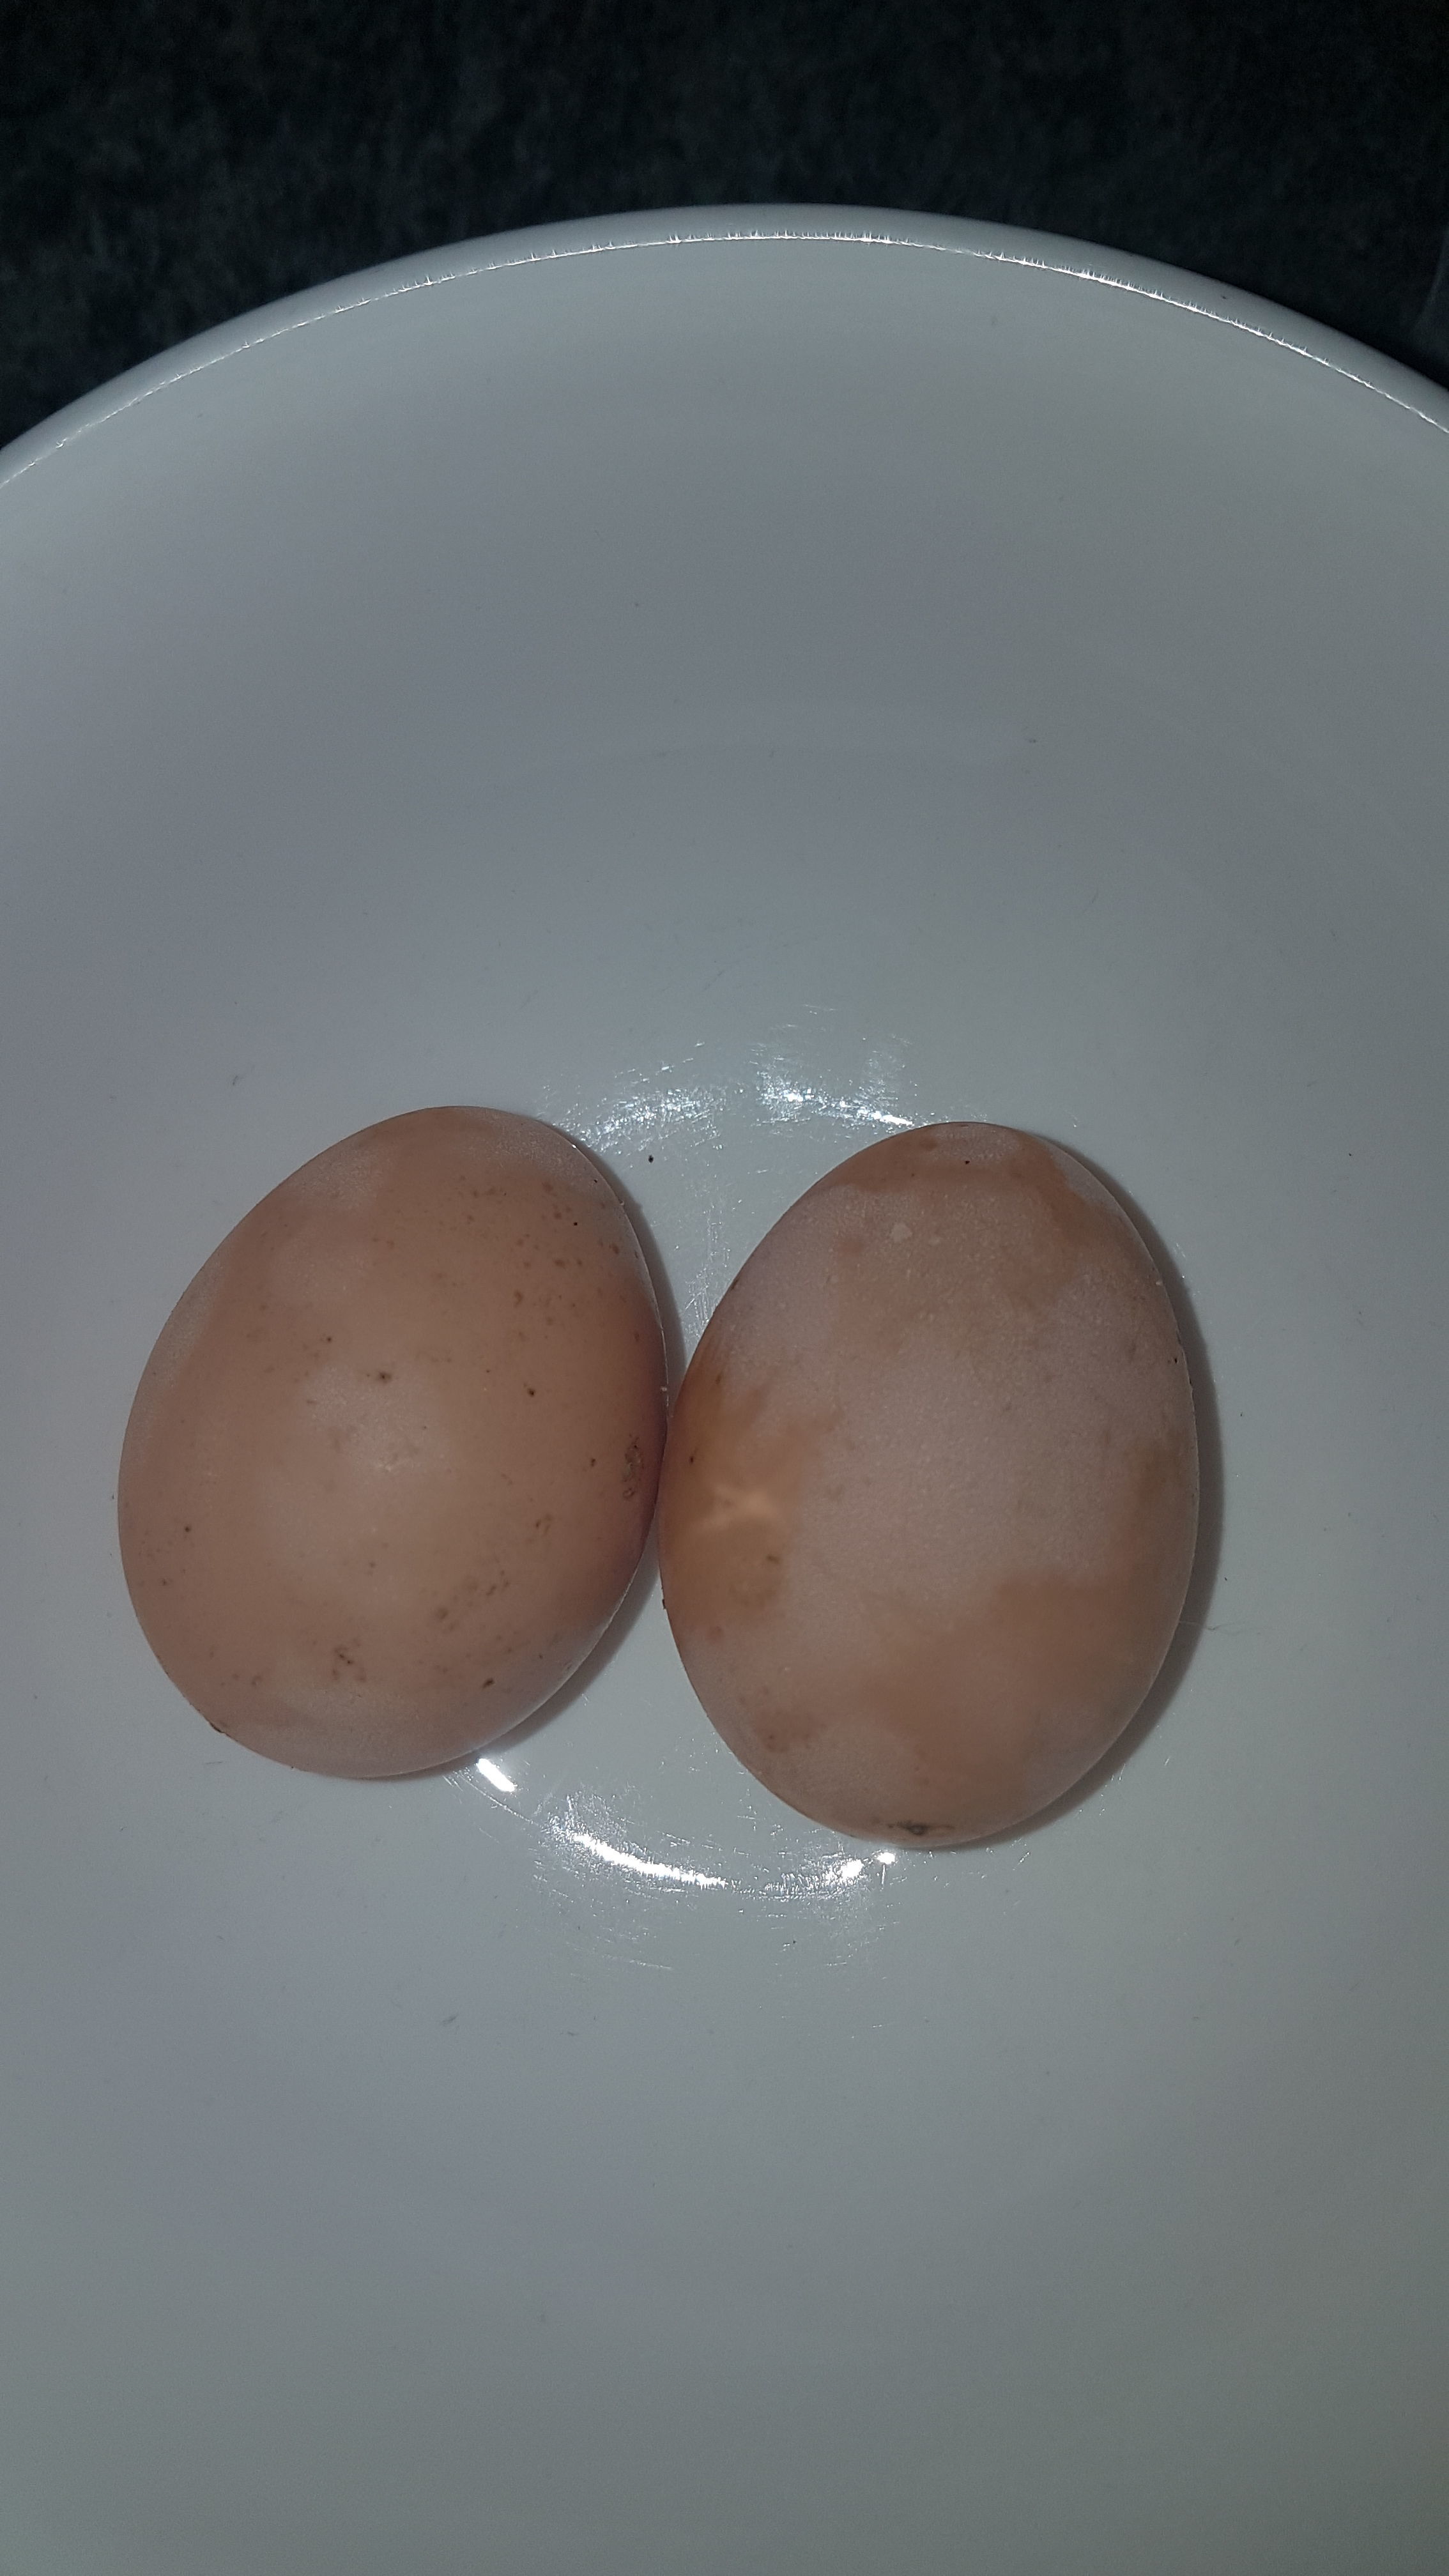 Our first eggs.